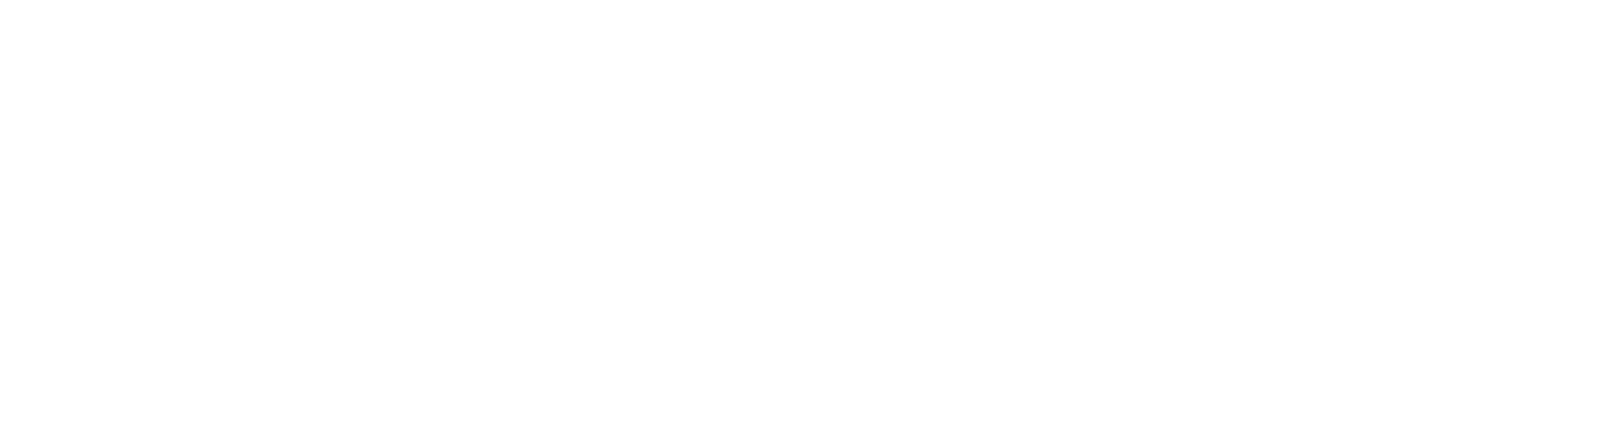 An outreach project associated with the Church of the Epiphany